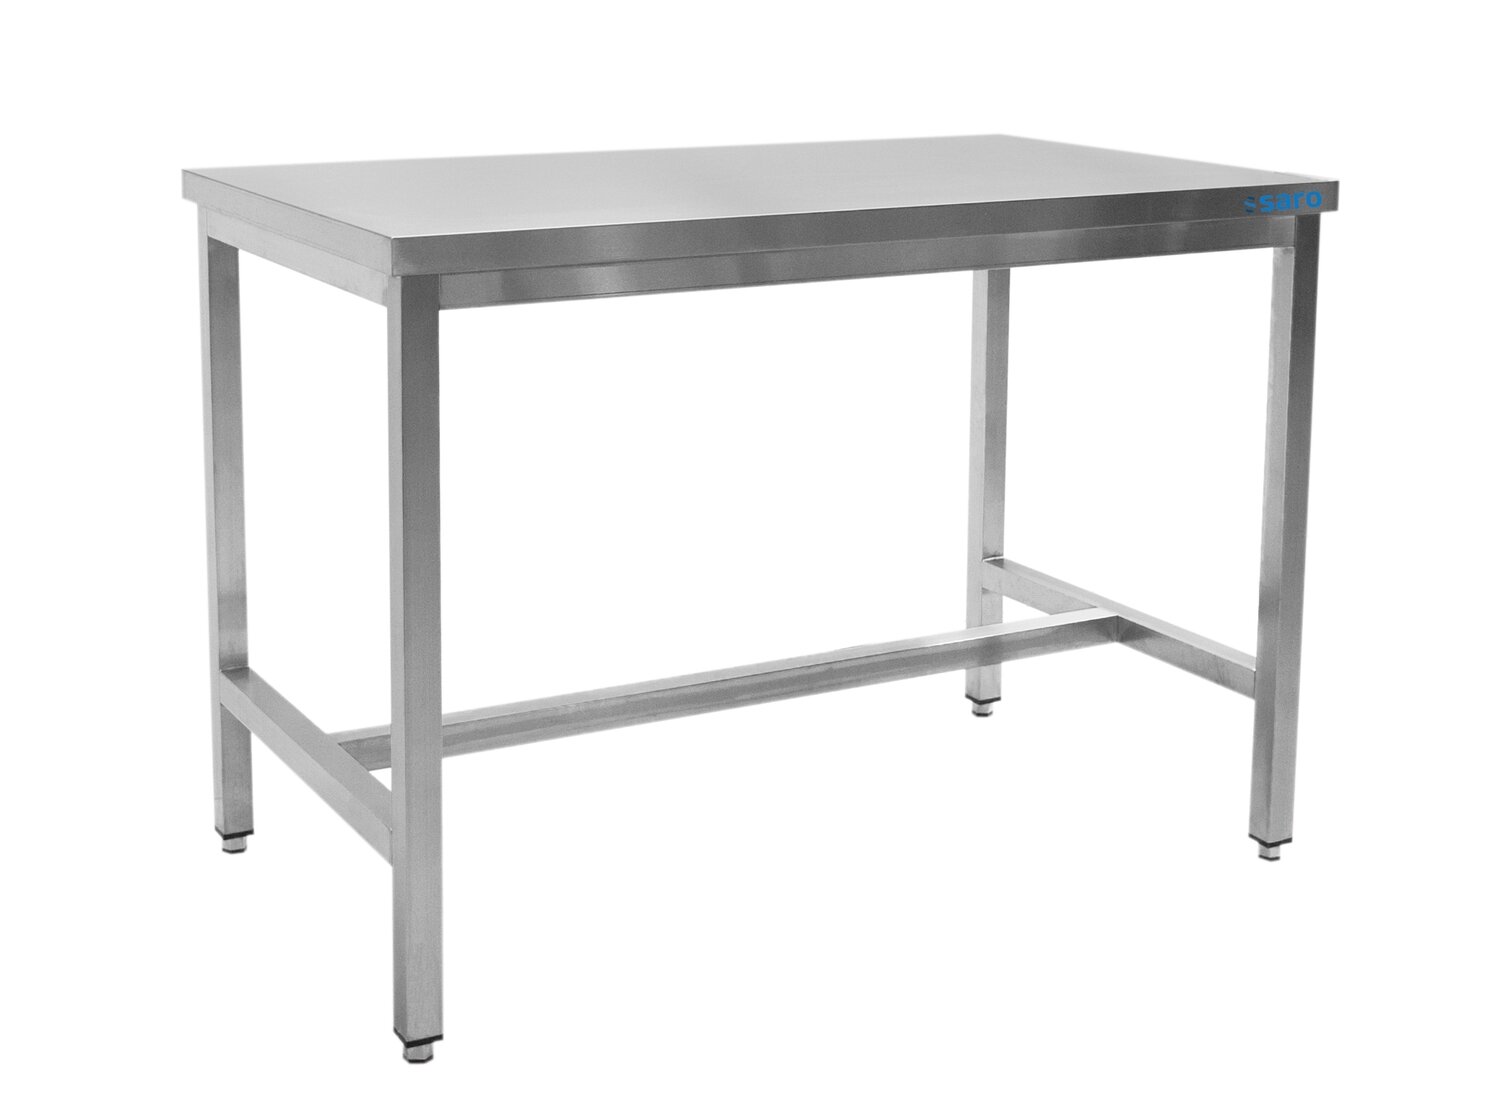 SARO Stainless steel table, without under shelf - 600 mm depth, 2000mm